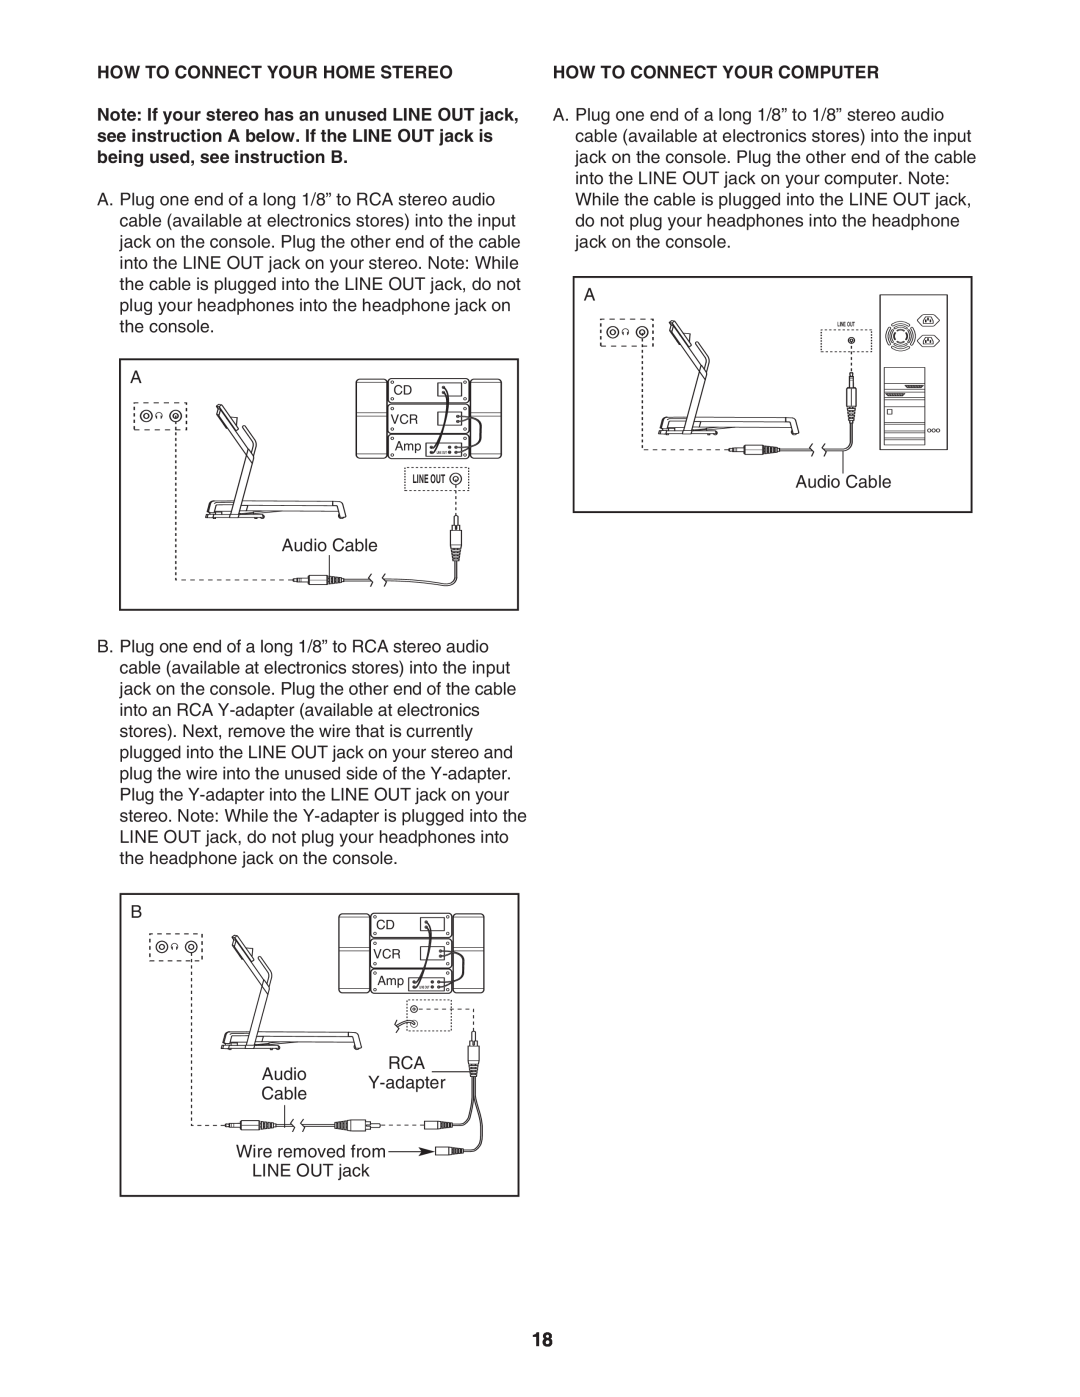 NordicTrack 30600.0 user manual How To Connect Your Home Stereo, How To Connect Your Computer, Line Out 